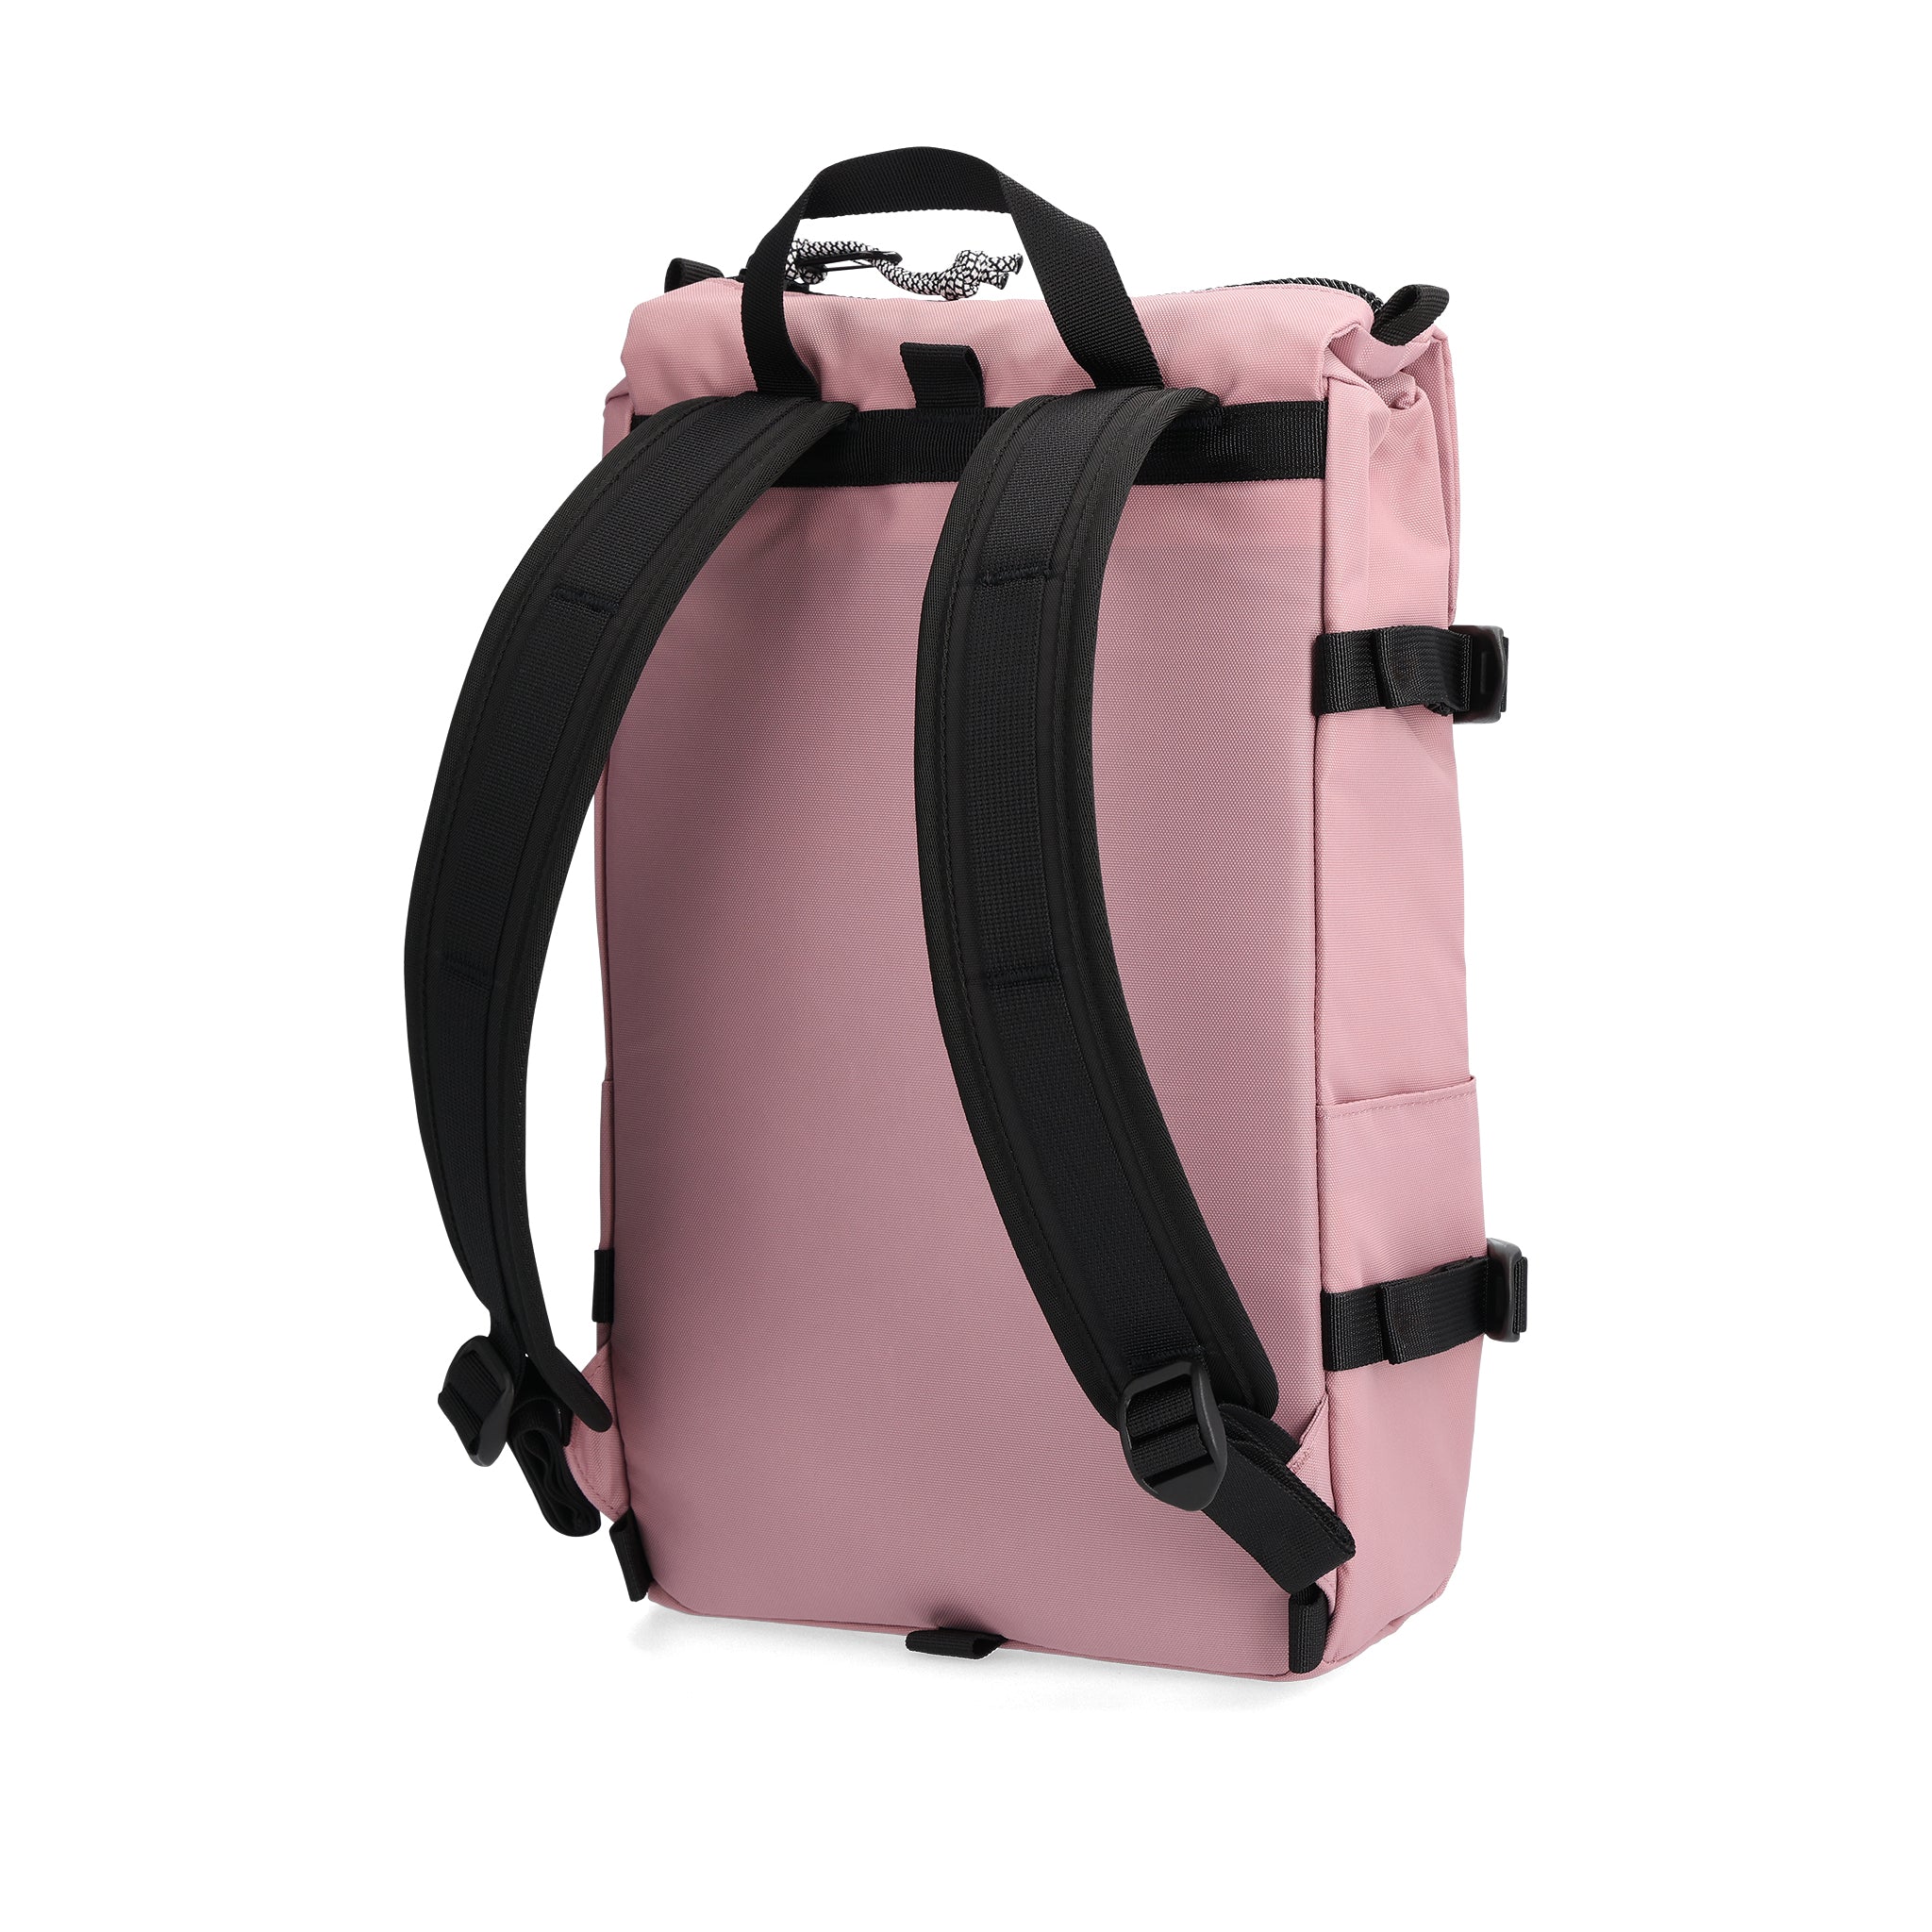 Back View of Topo Designs Rover Pack Mini in "Rose"